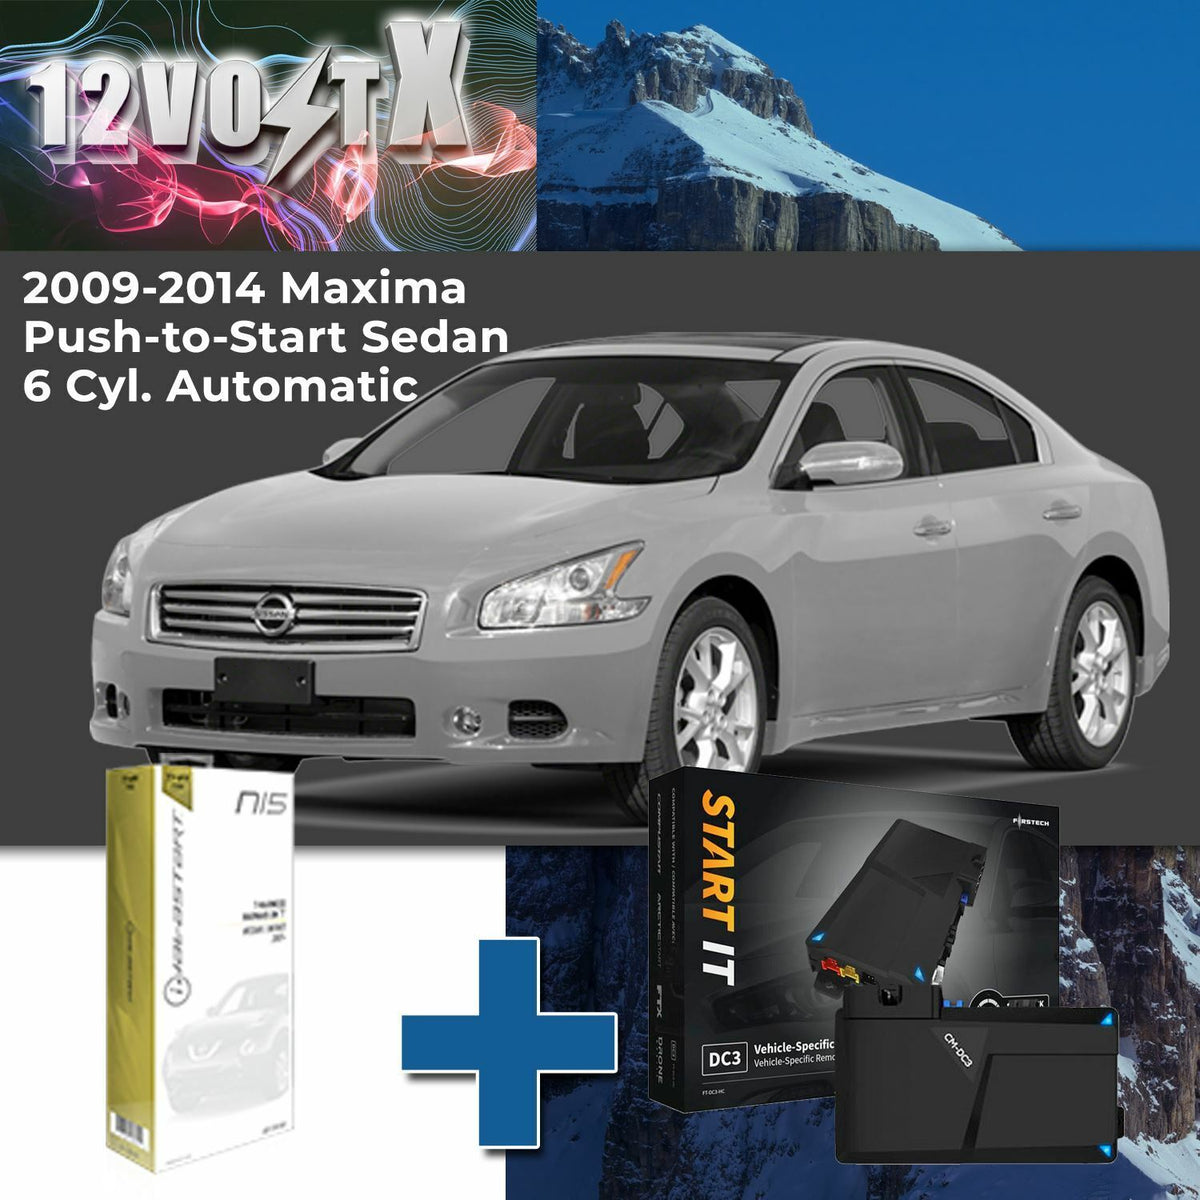 Remote Start for 2009-2014 fits Nissan Maxima Push-to-Start Sedan 6 Cyl.